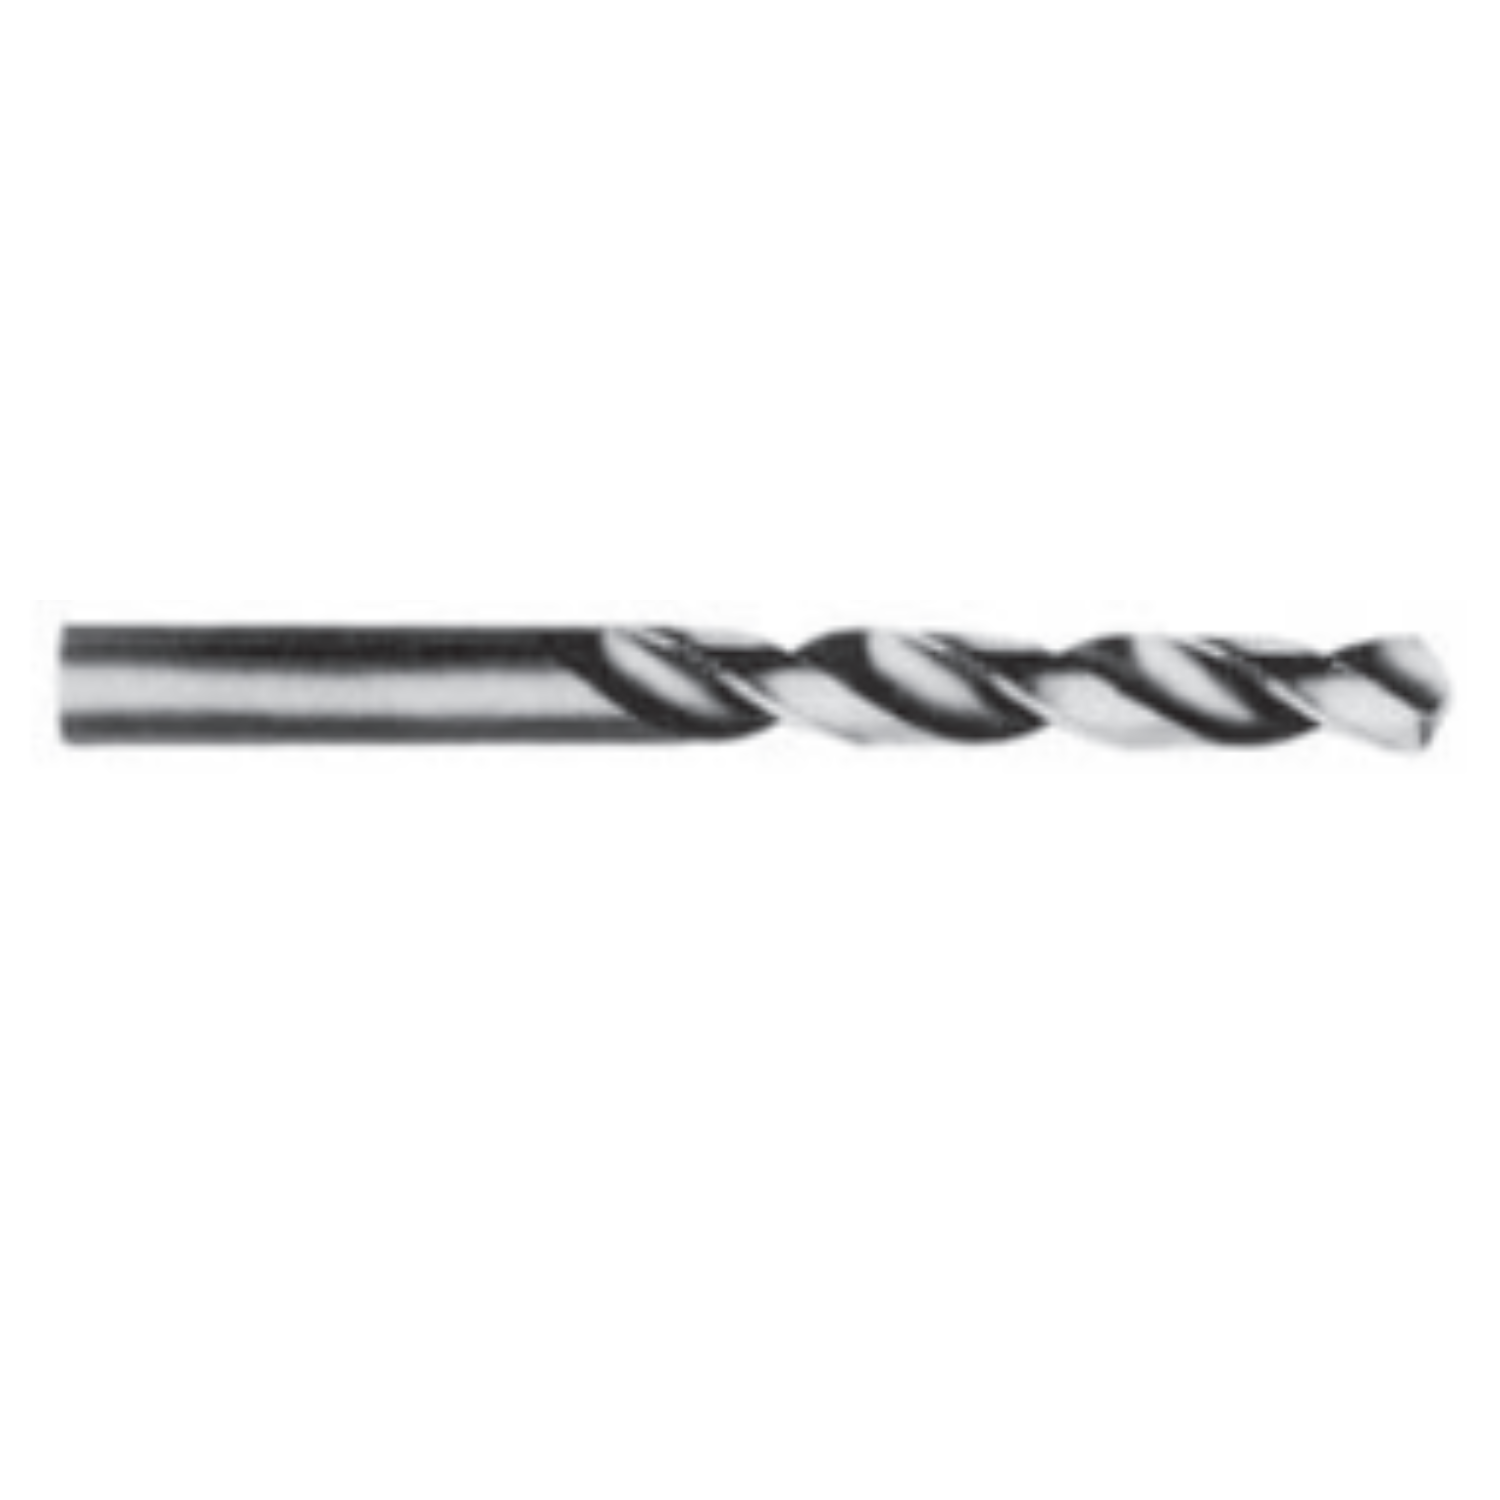 YEW AIK 6146 Long Series Drills - Straight Shank Standard Helix - Premium Straight Shank Standard Helix from YEW AIK - Shop now at Yew Aik.